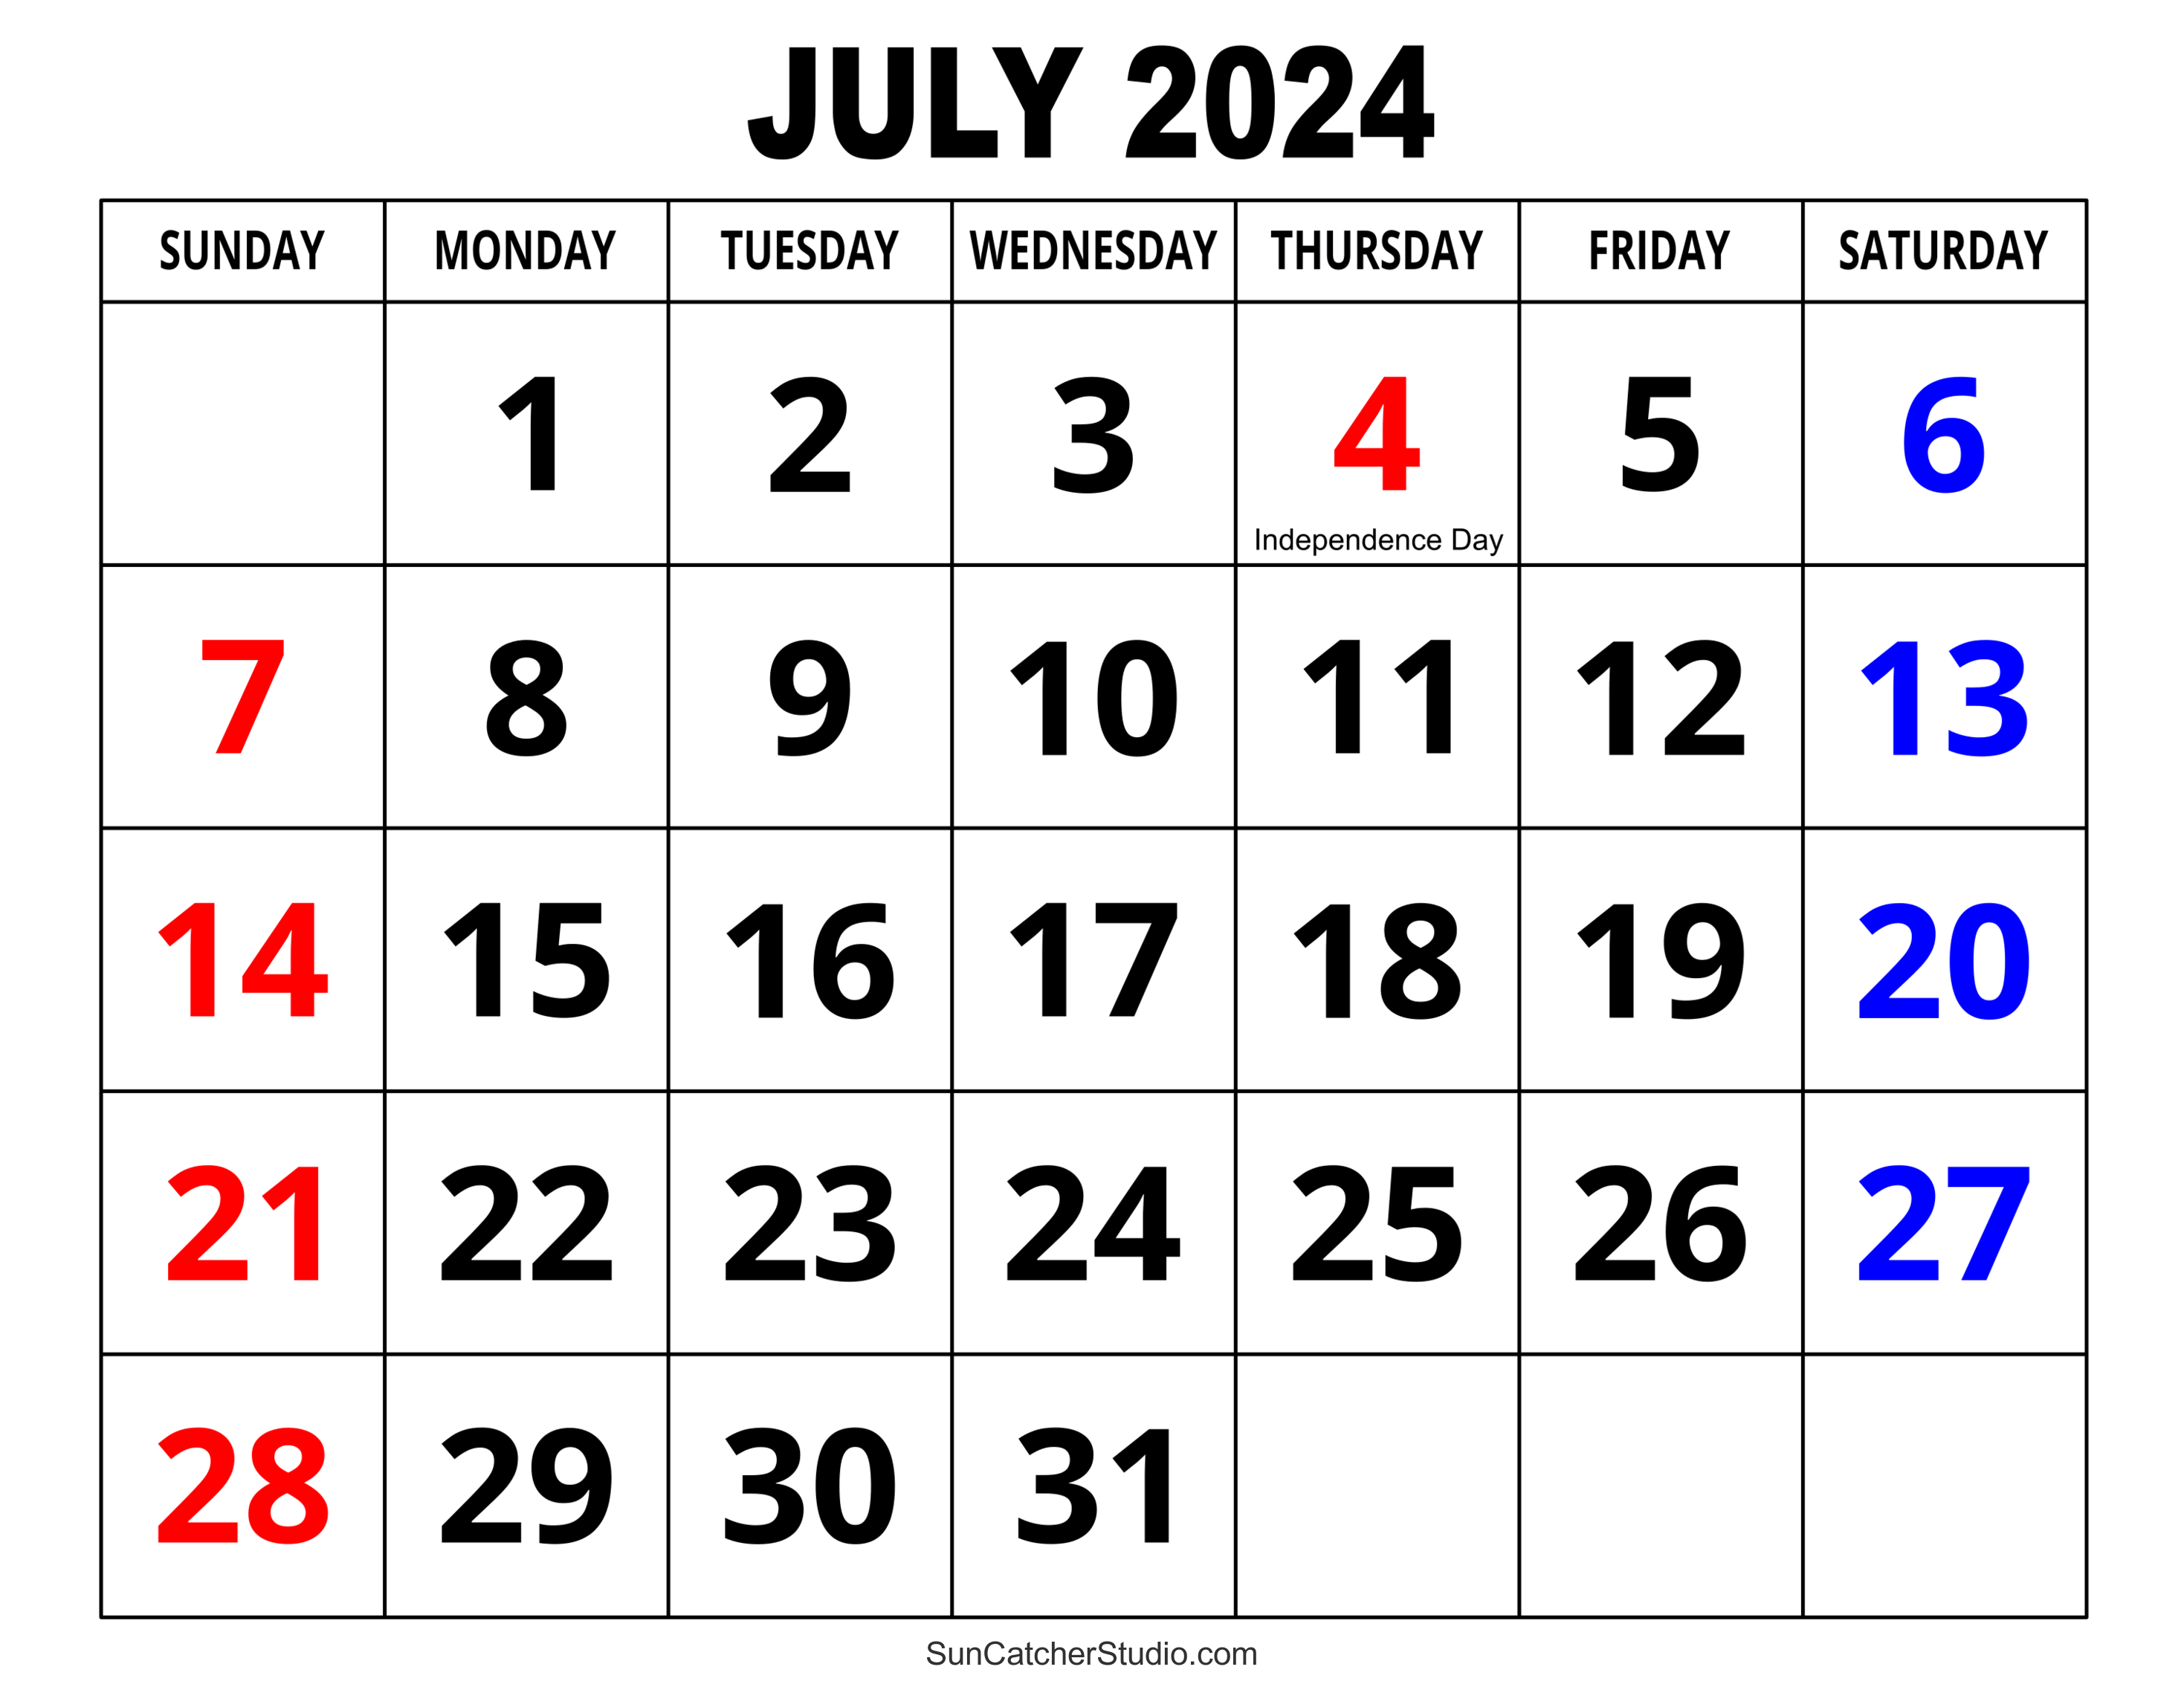 July 2024 Calendar (Free Printable) – Diy Projects, Patterns regarding 26th July 2024 Calendar Printable